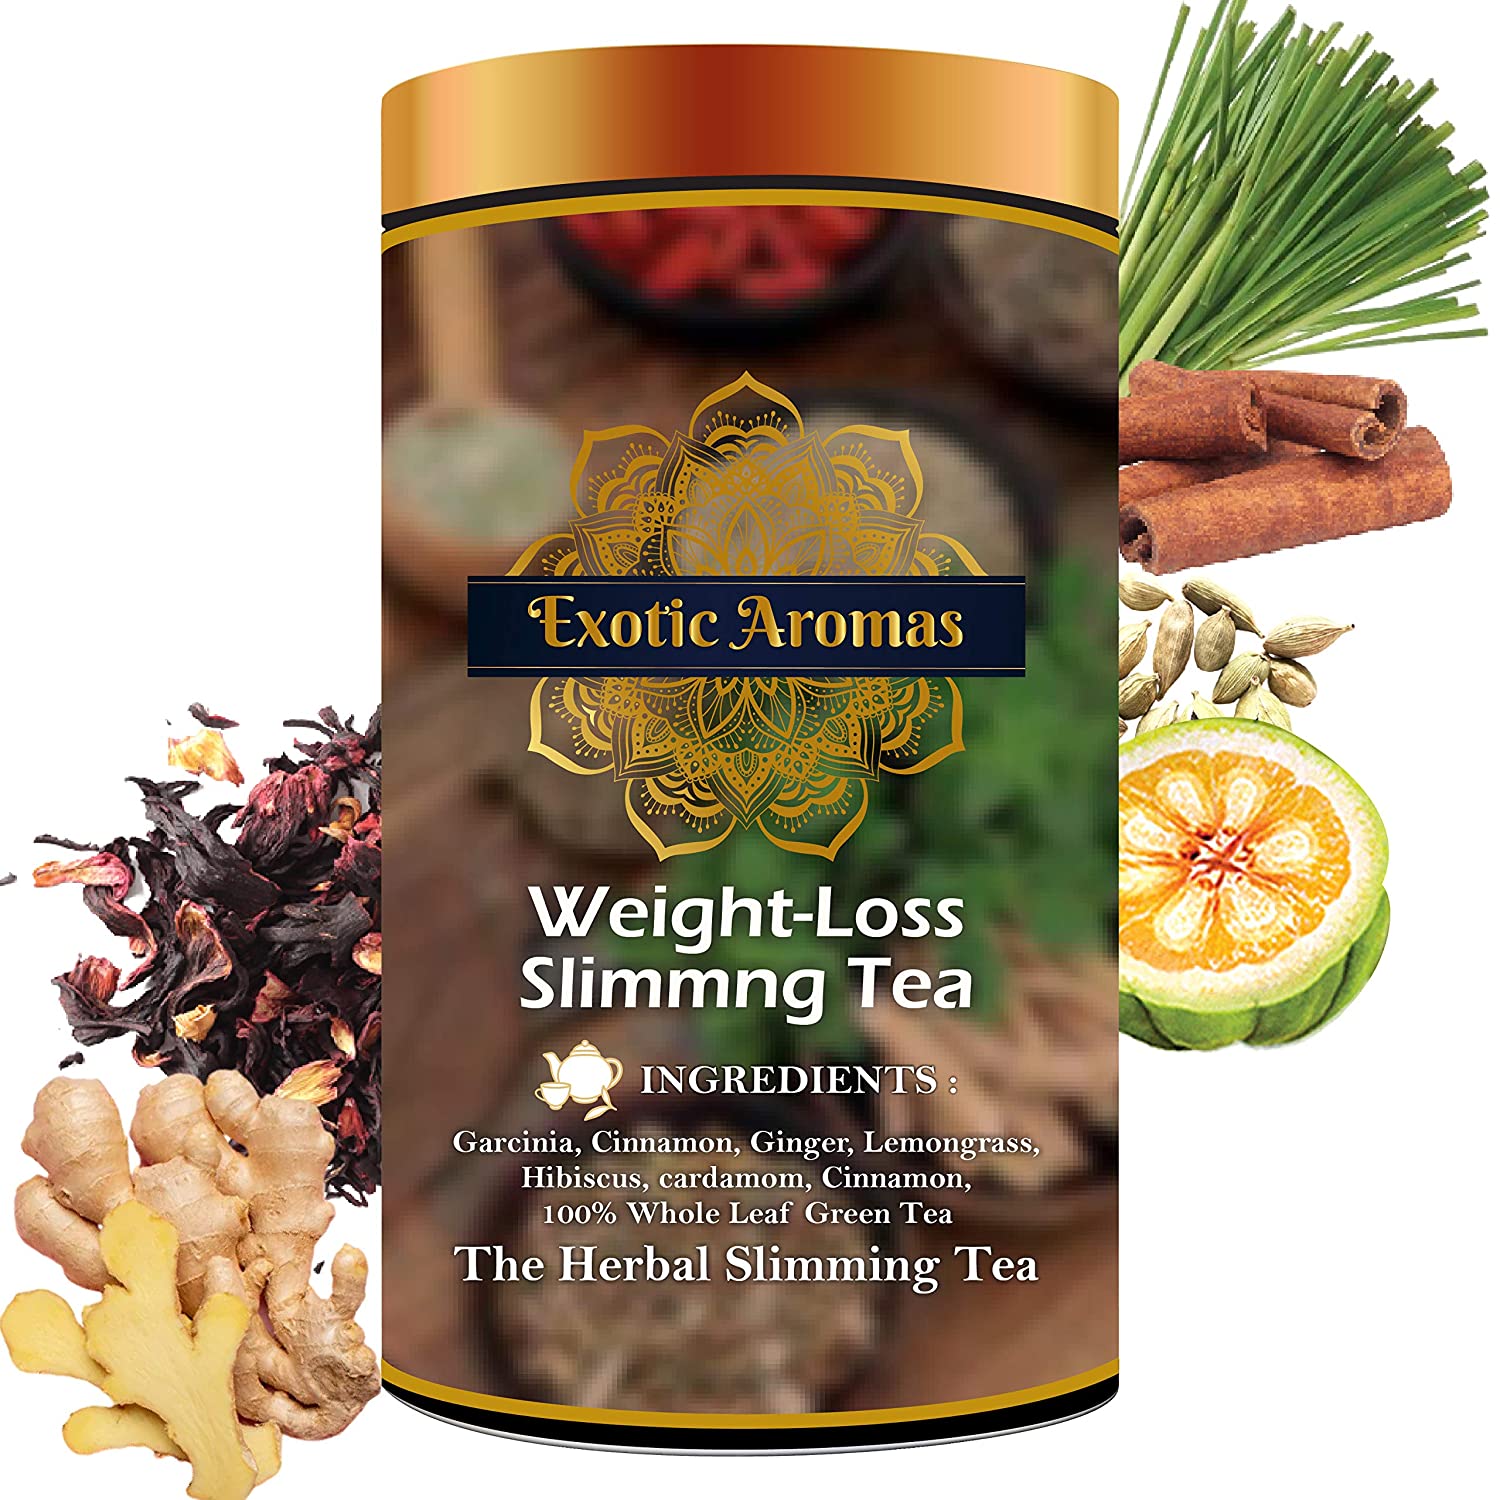 Exotic aroma green tea | green tea for weight loss with garcinia, cinnamon, ginger , lemongrass , hibiscus | 200gm serves 100 cups